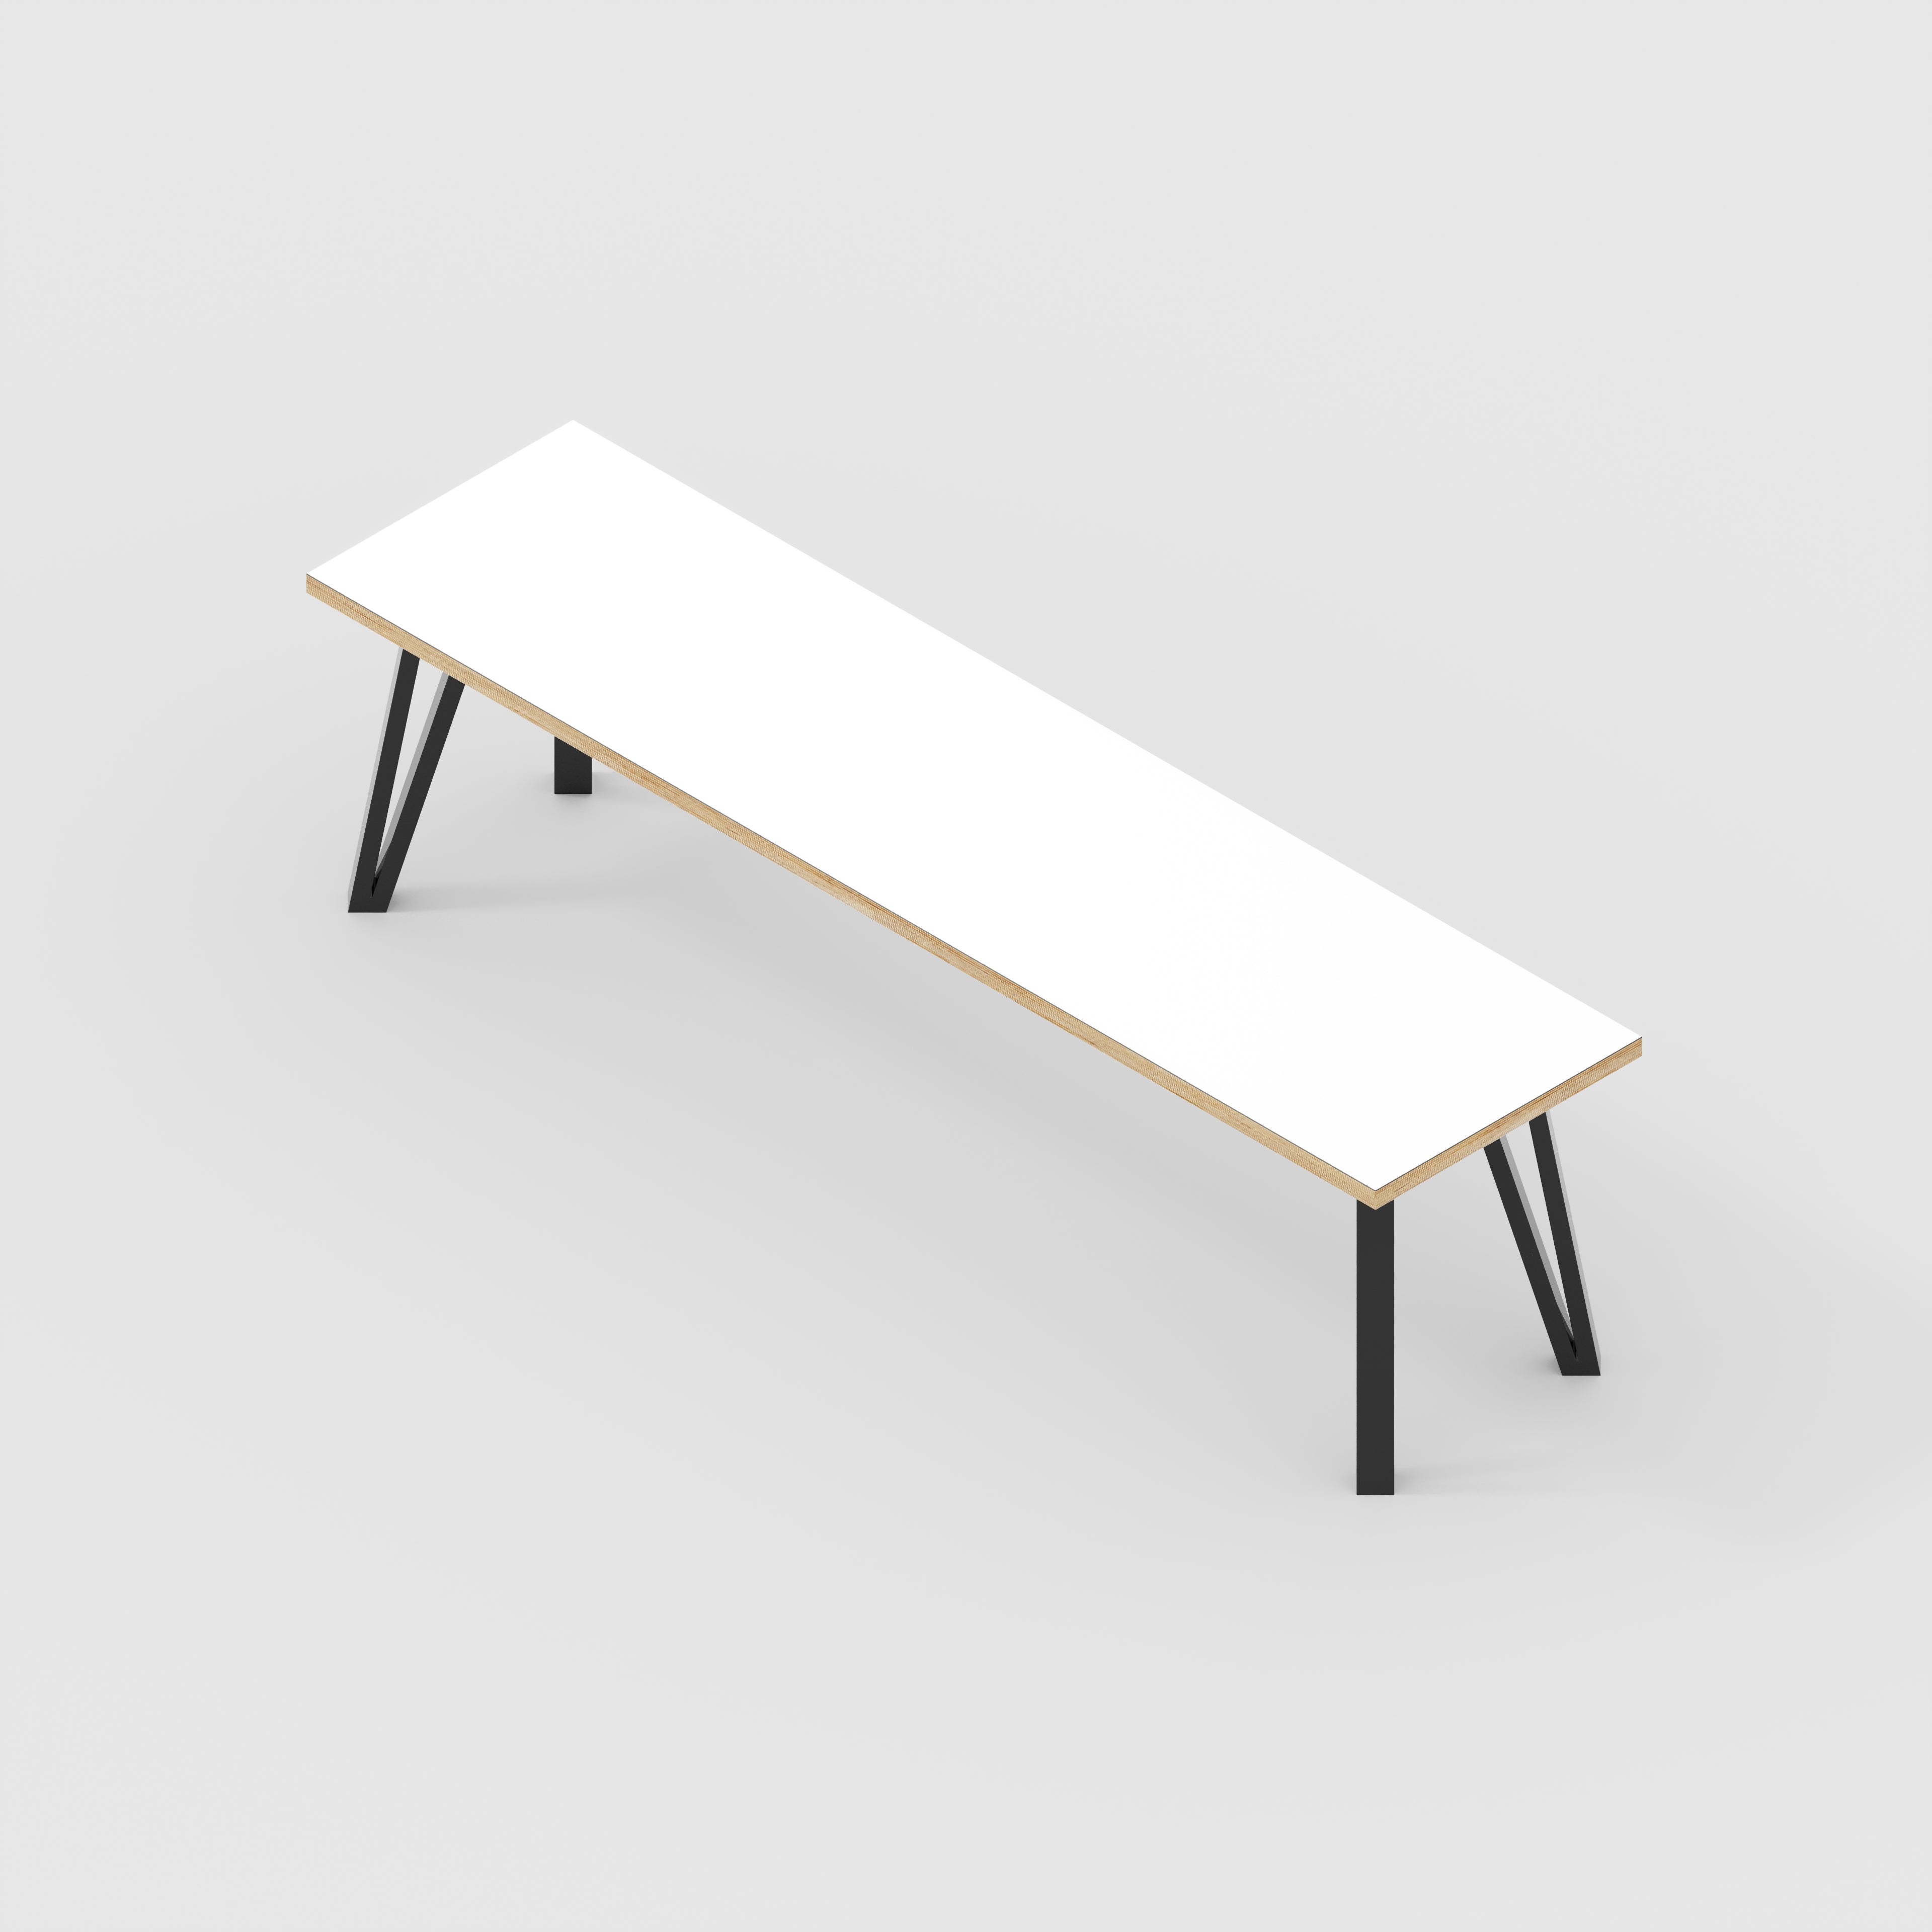 Bench Seat with Black Box Hairpin Legs - Formica White - 1600(w) x 400(d) x 450(h)